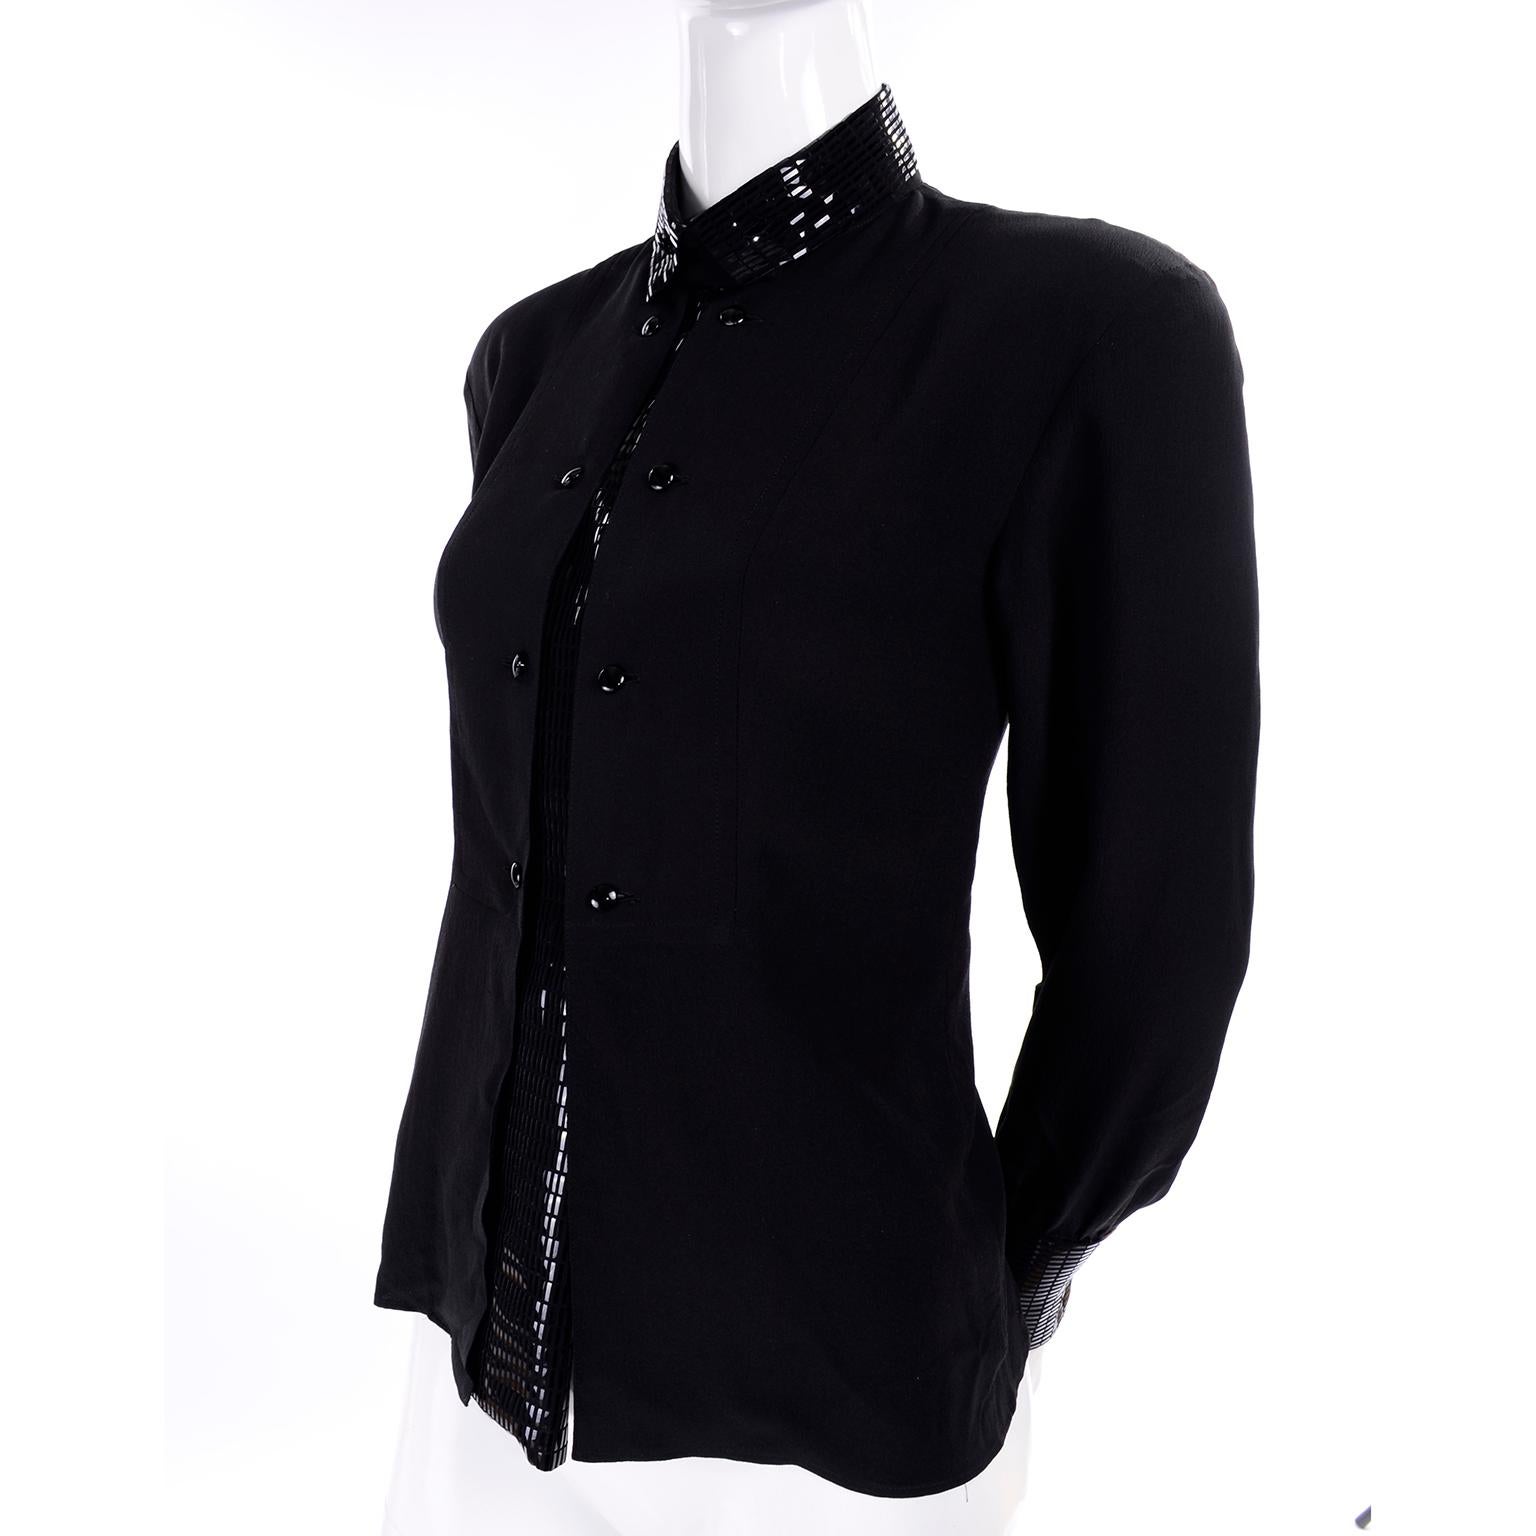 This is a remarkable Bernard Perris 1980's vintage silk black blouse with an attached reflective beaded black dress dickie! This blouse has a unique faux dickie, with black long reflective shiny rectangle bead like decoration carrying from the